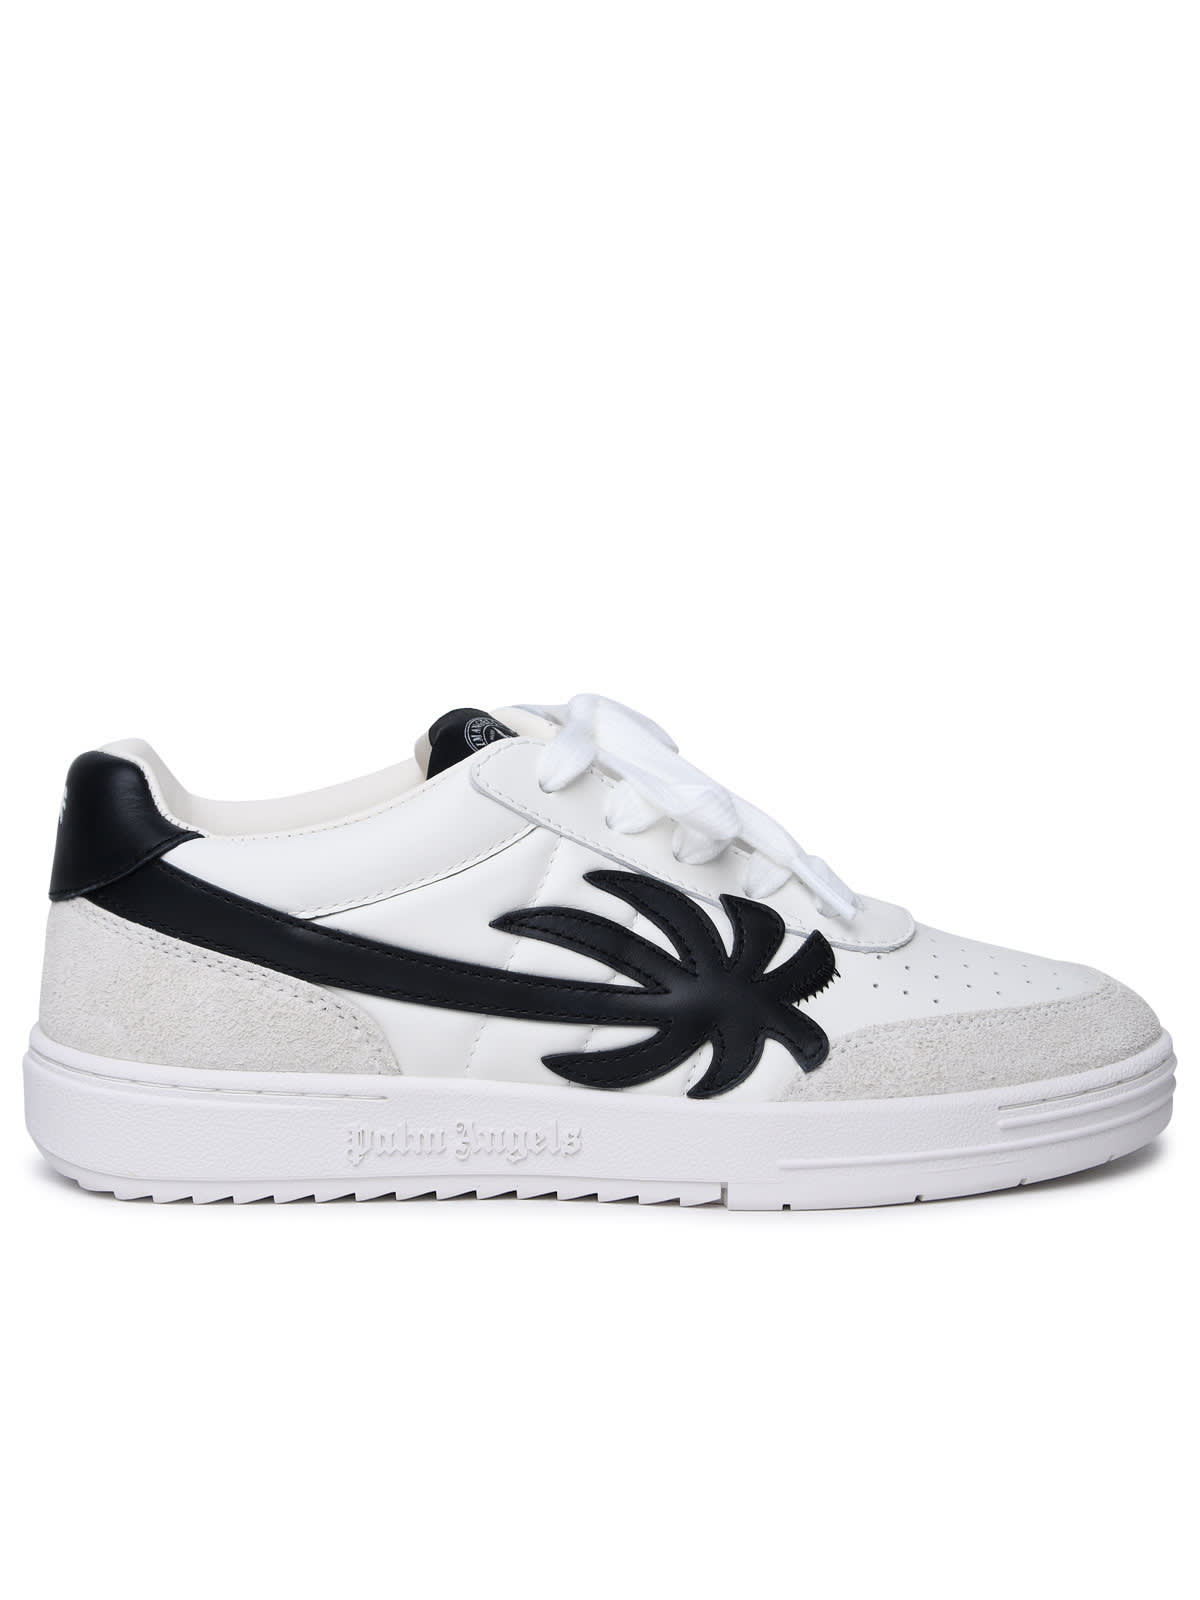 palm Beach University White Leather Sneakers